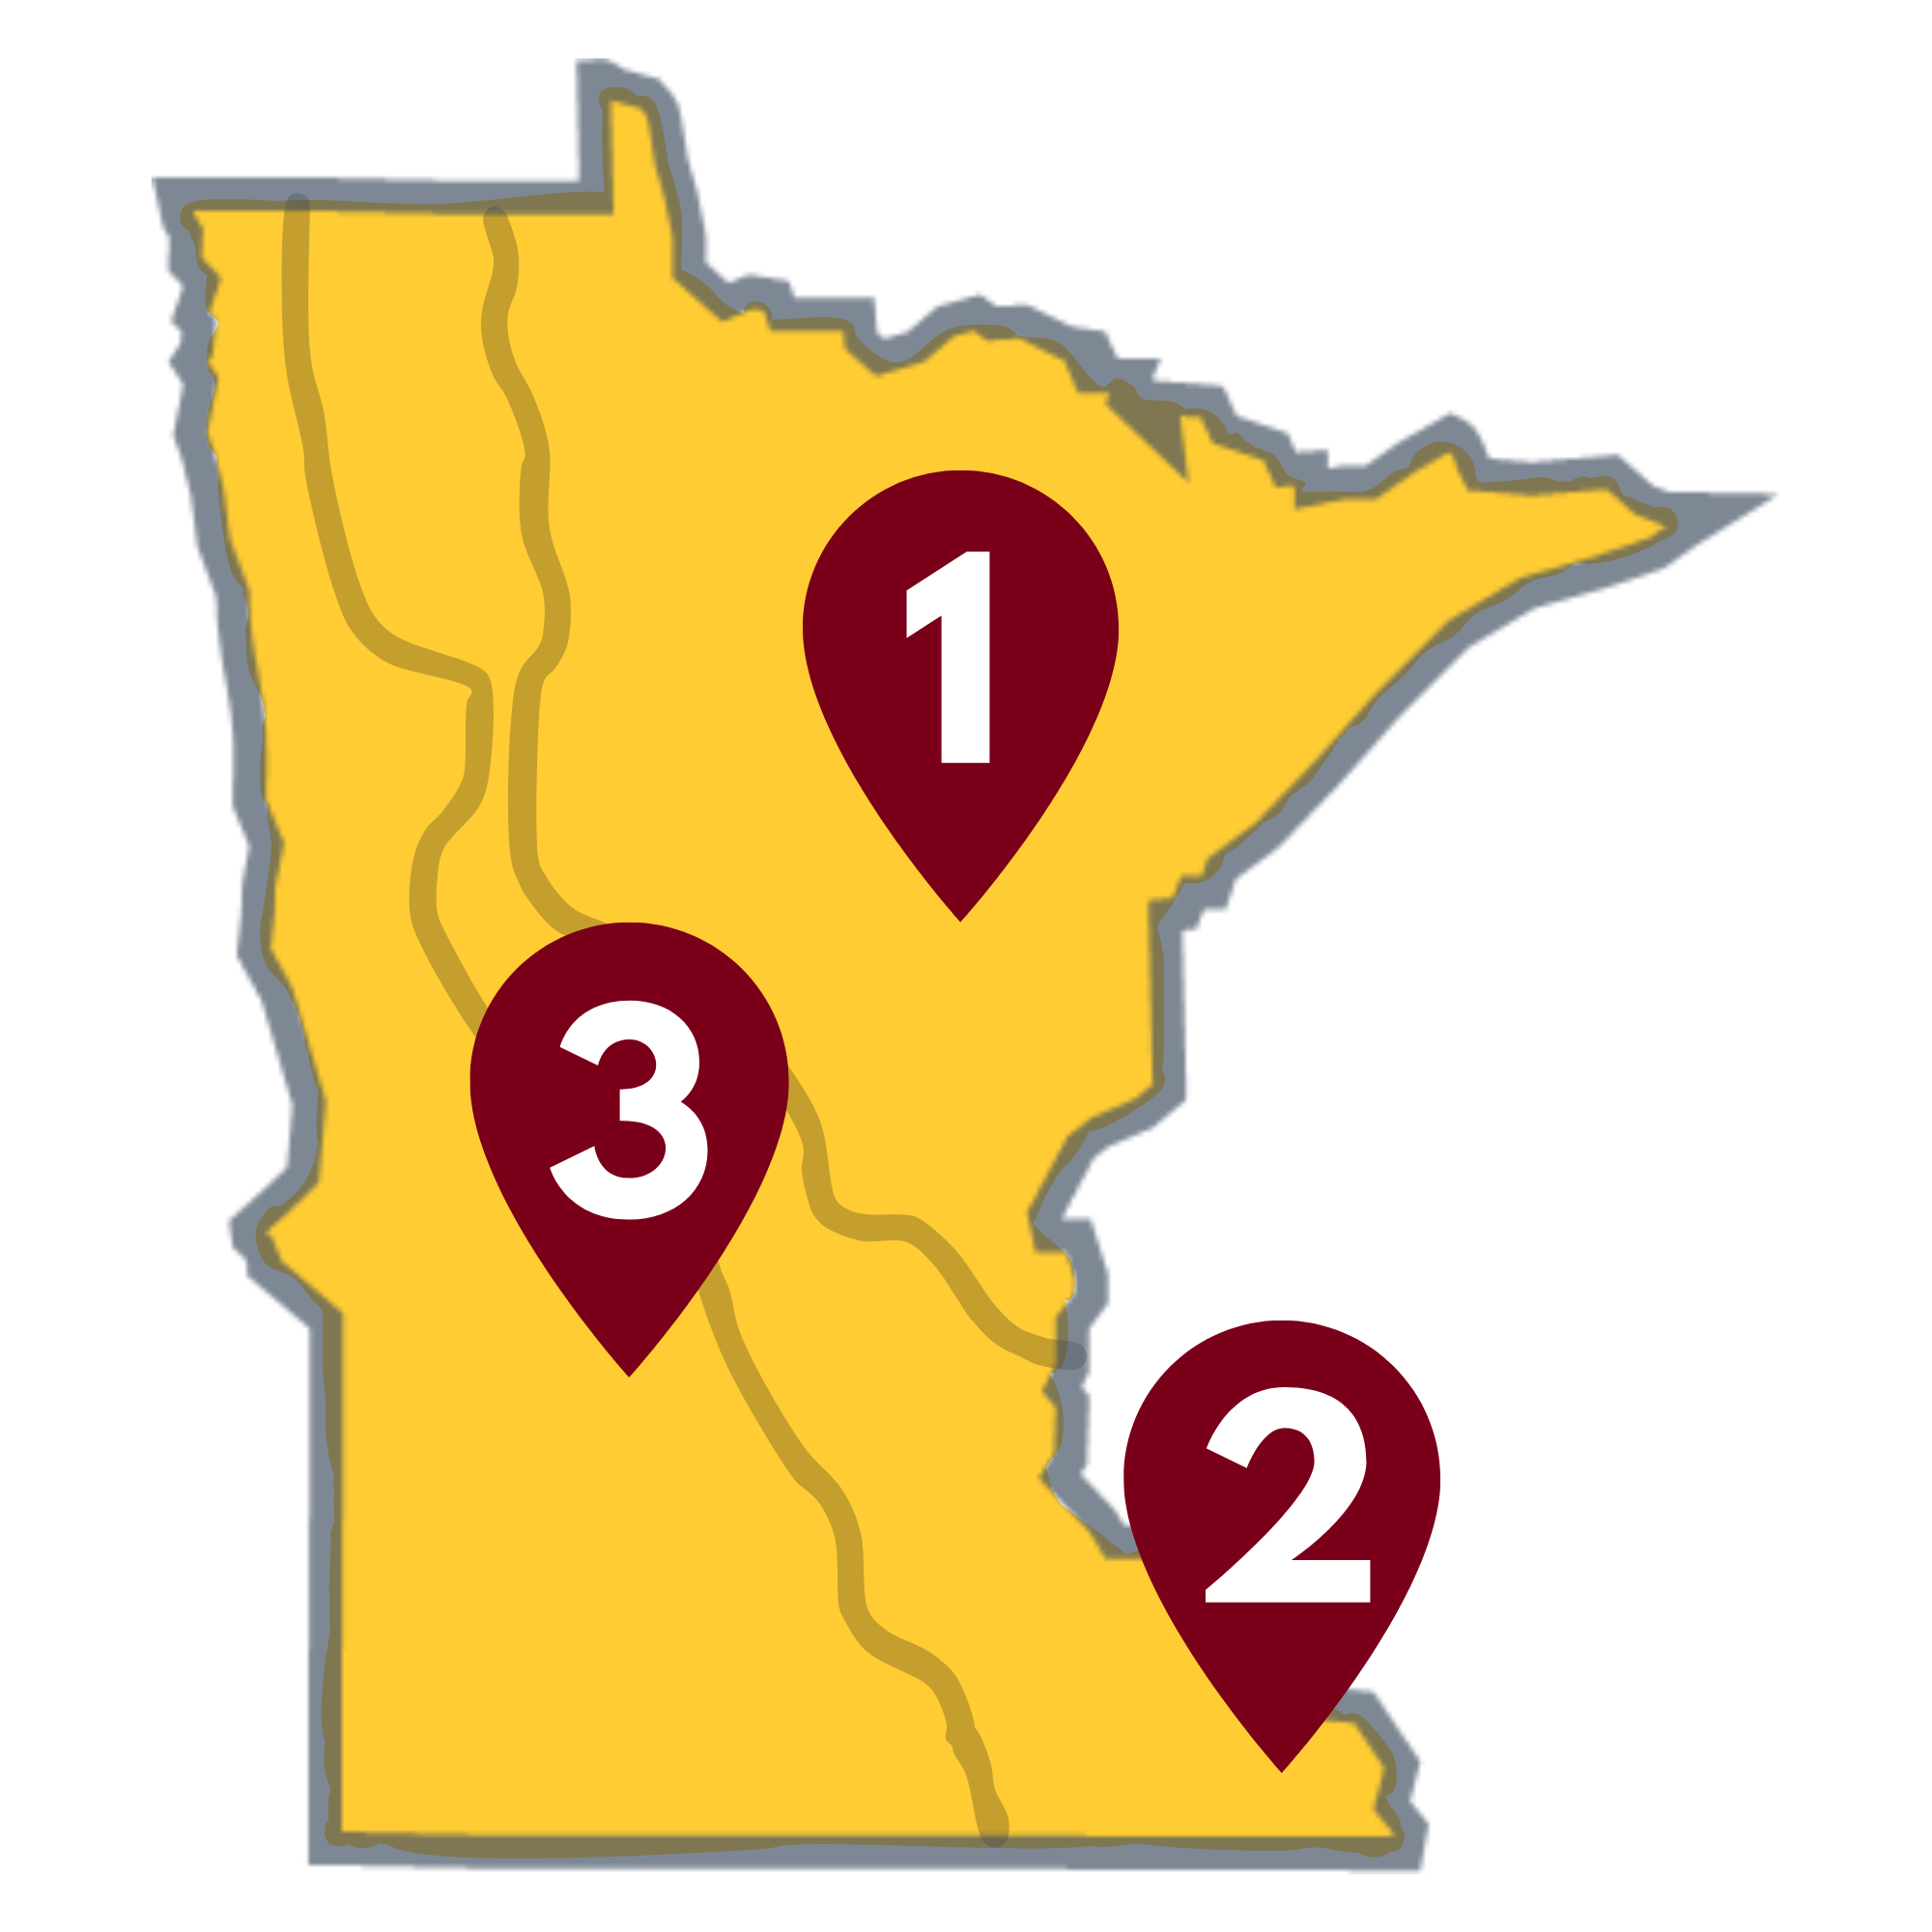 Yellow state of Minnesota with three maroon place markers numbered 1 (in the northeast), 2 (in the southeast), and 3 (in the west)